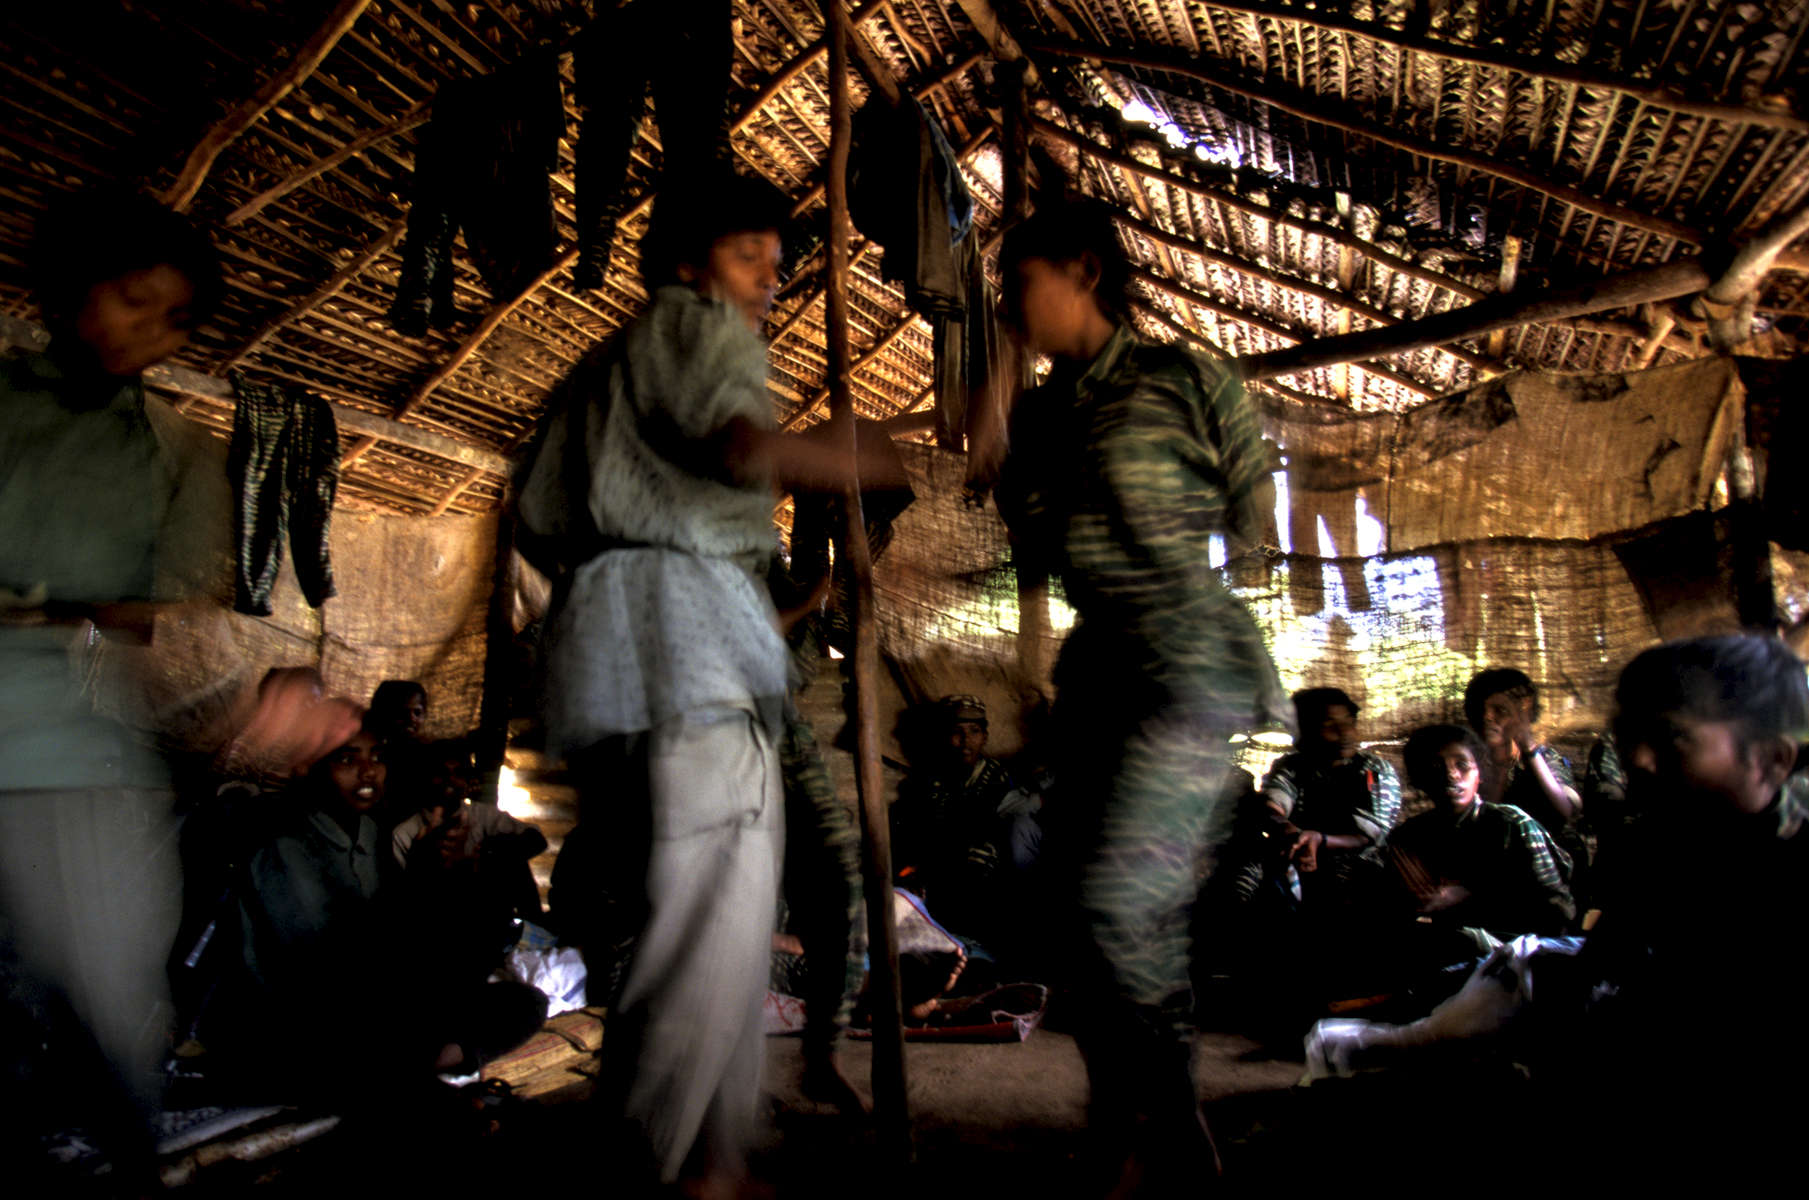 Female cadres of the LTTE singing and dancing to revolutionary songs after military training had been interrupted from a monsoon rainstorm in the northern Vanni region of Sri Lanka. 1998